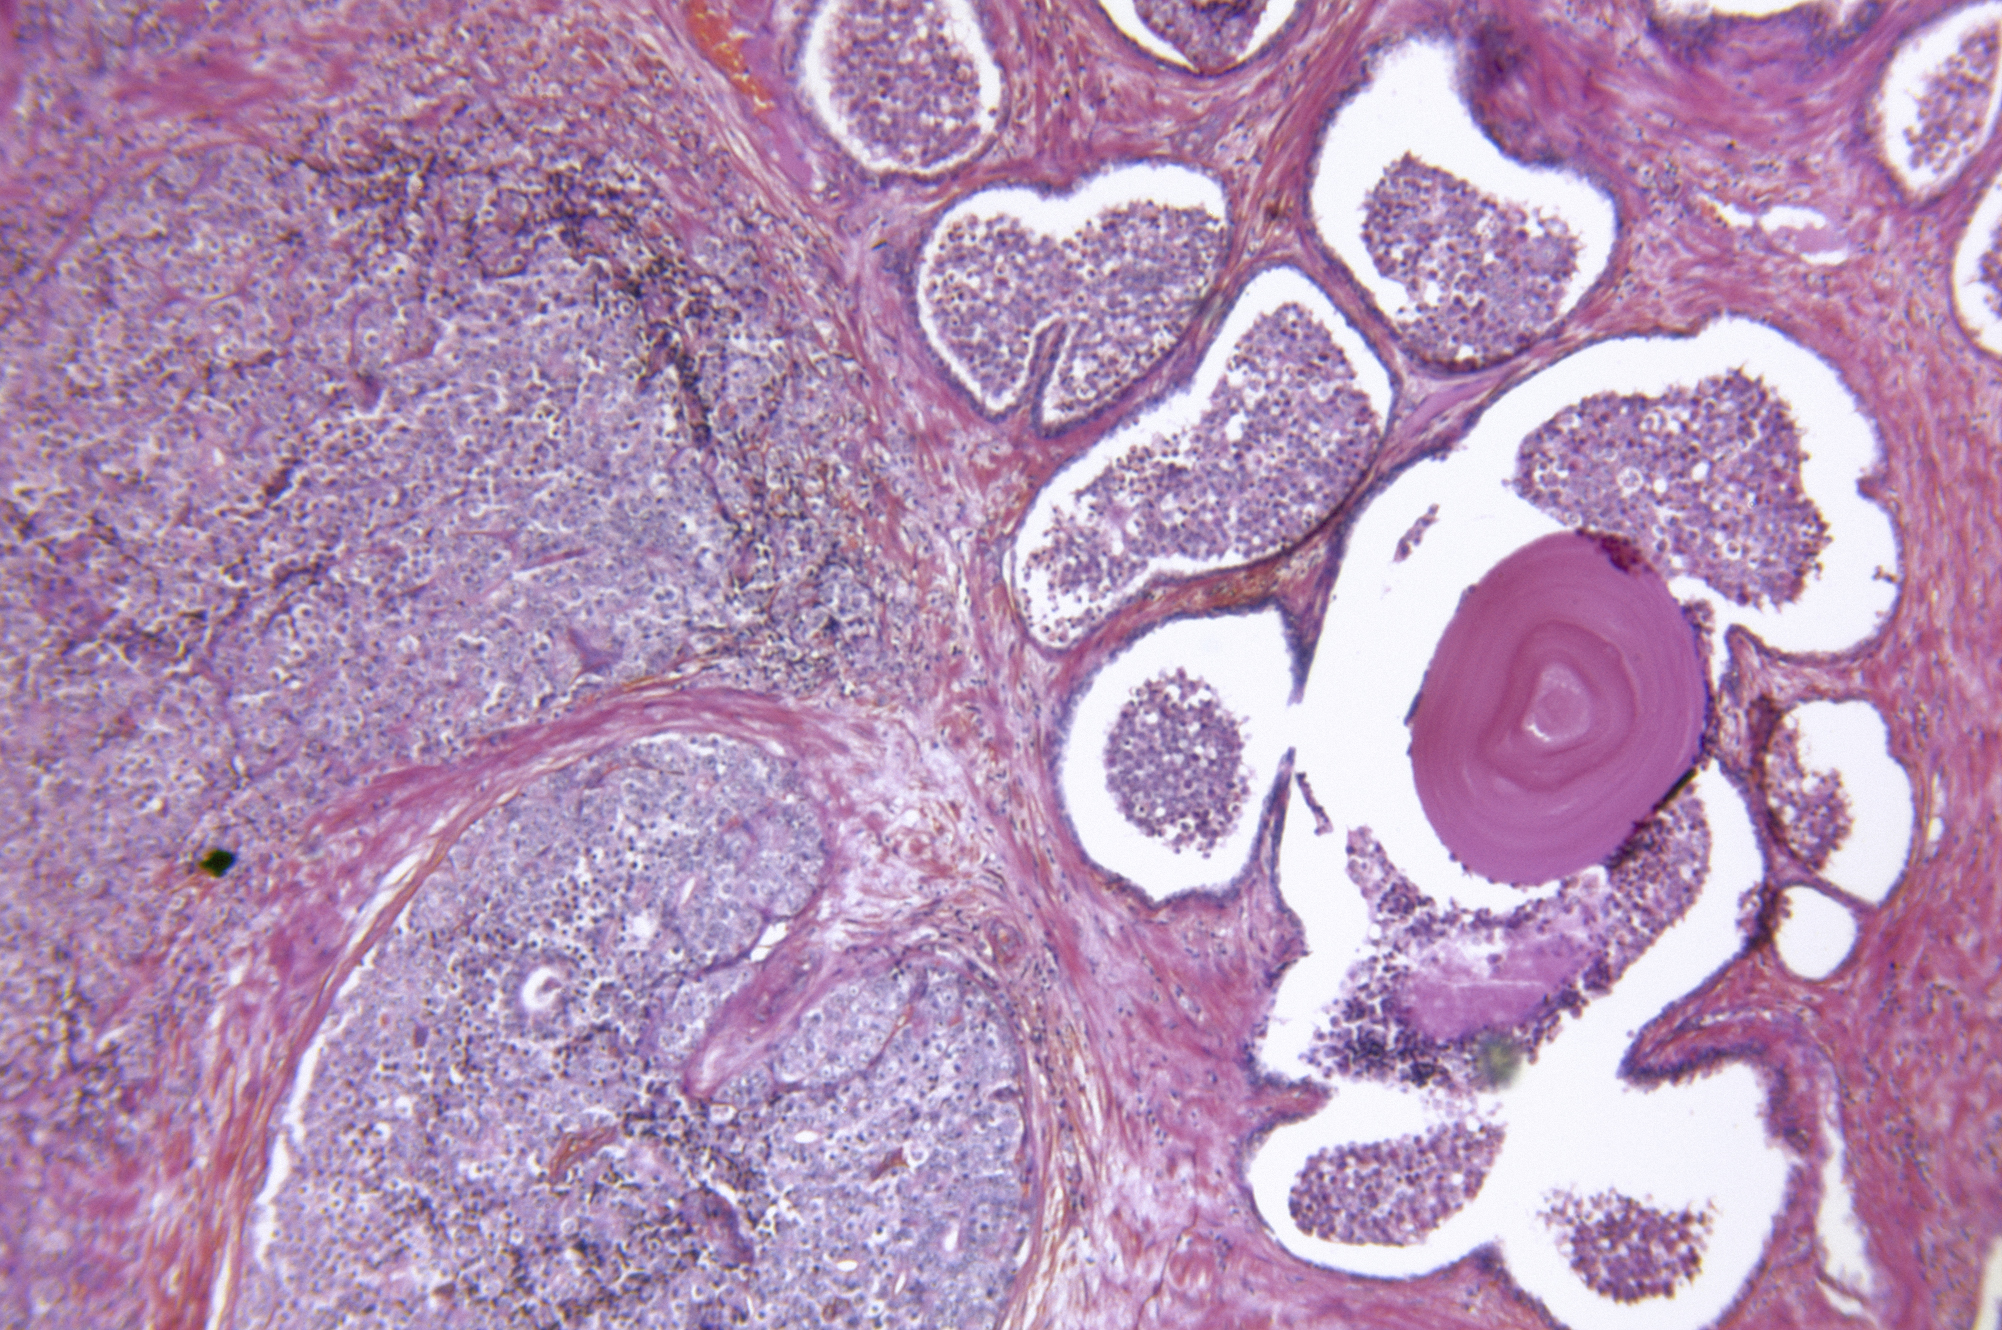 Microscopic photo of a professionally prepared slide demonstrating the cellular structure of the prostate gland adenocarcinoma. (iStock Photo)